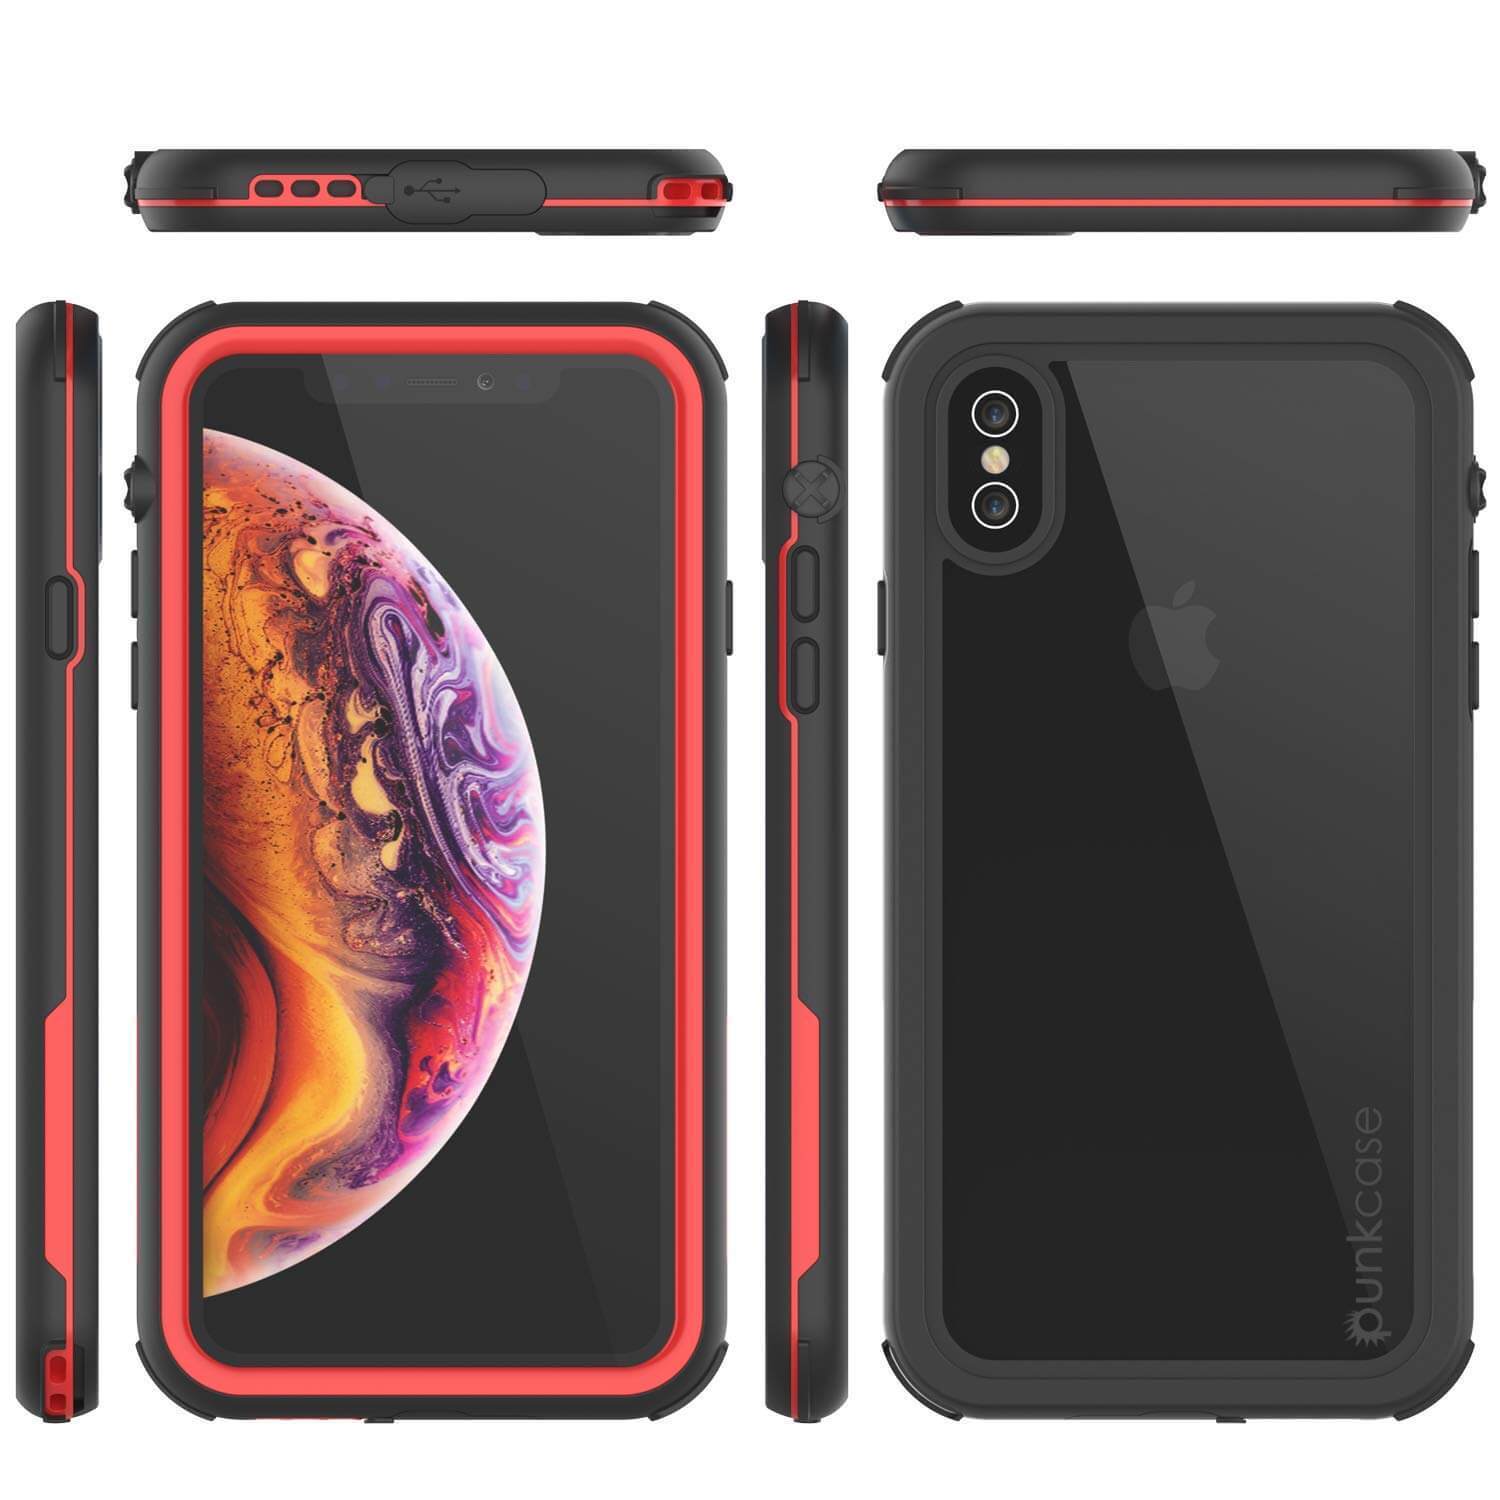 iPhone XS Max Waterproof IP68 Case, Punkcase [red] [Rapture Series]  W/Built in Screen Protector